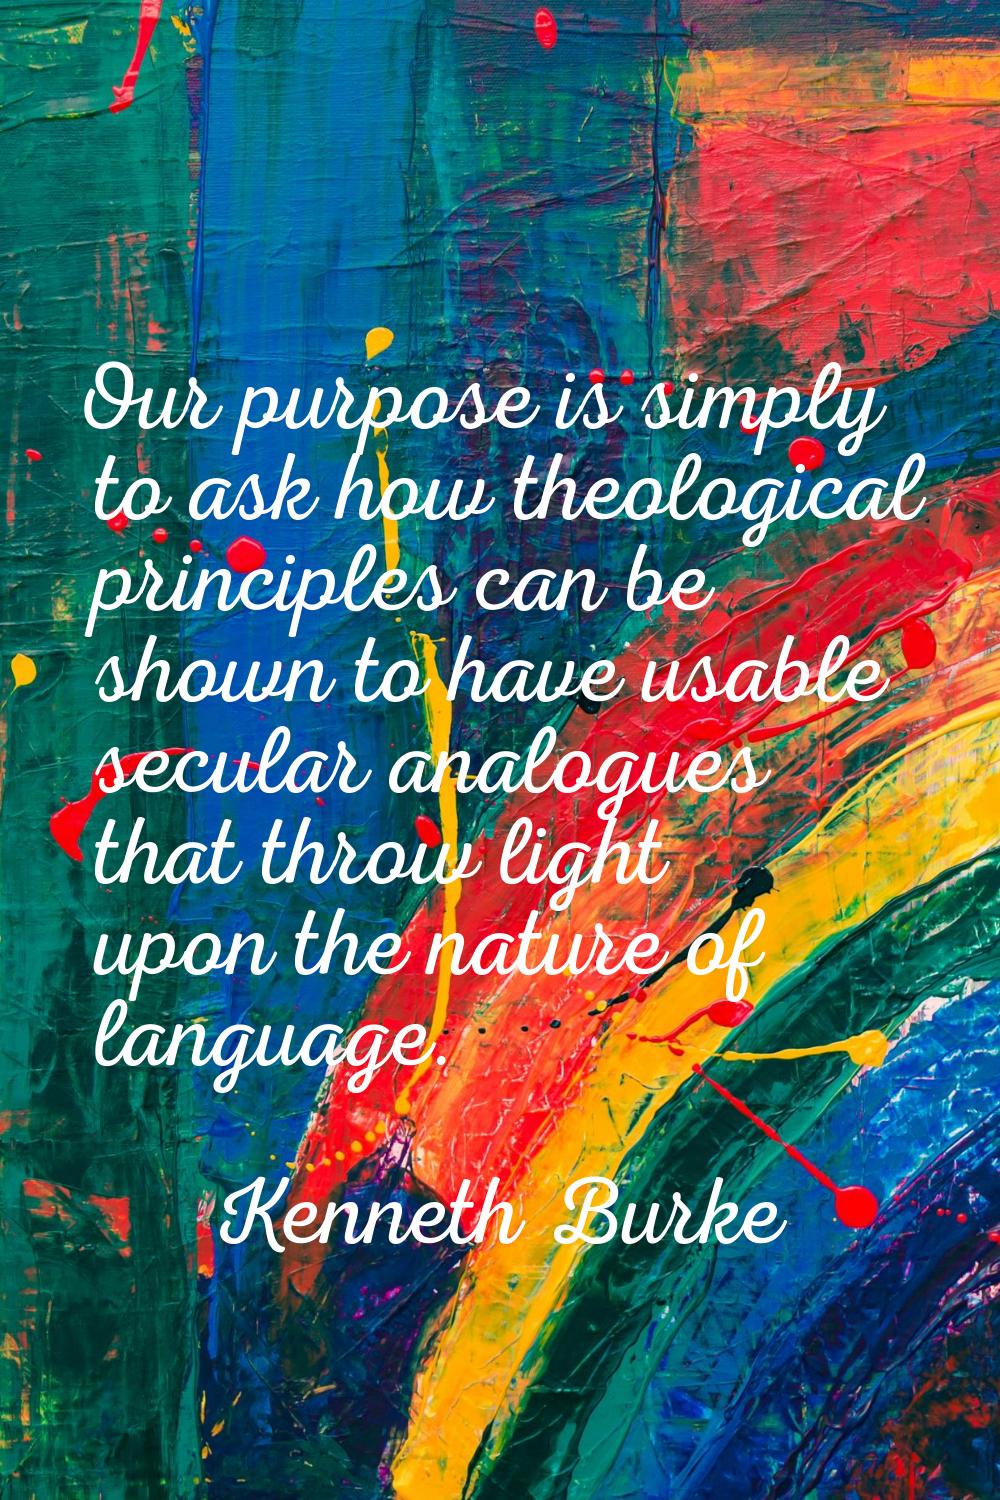 Our purpose is simply to ask how theological principles can be shown to have usable secular analogu